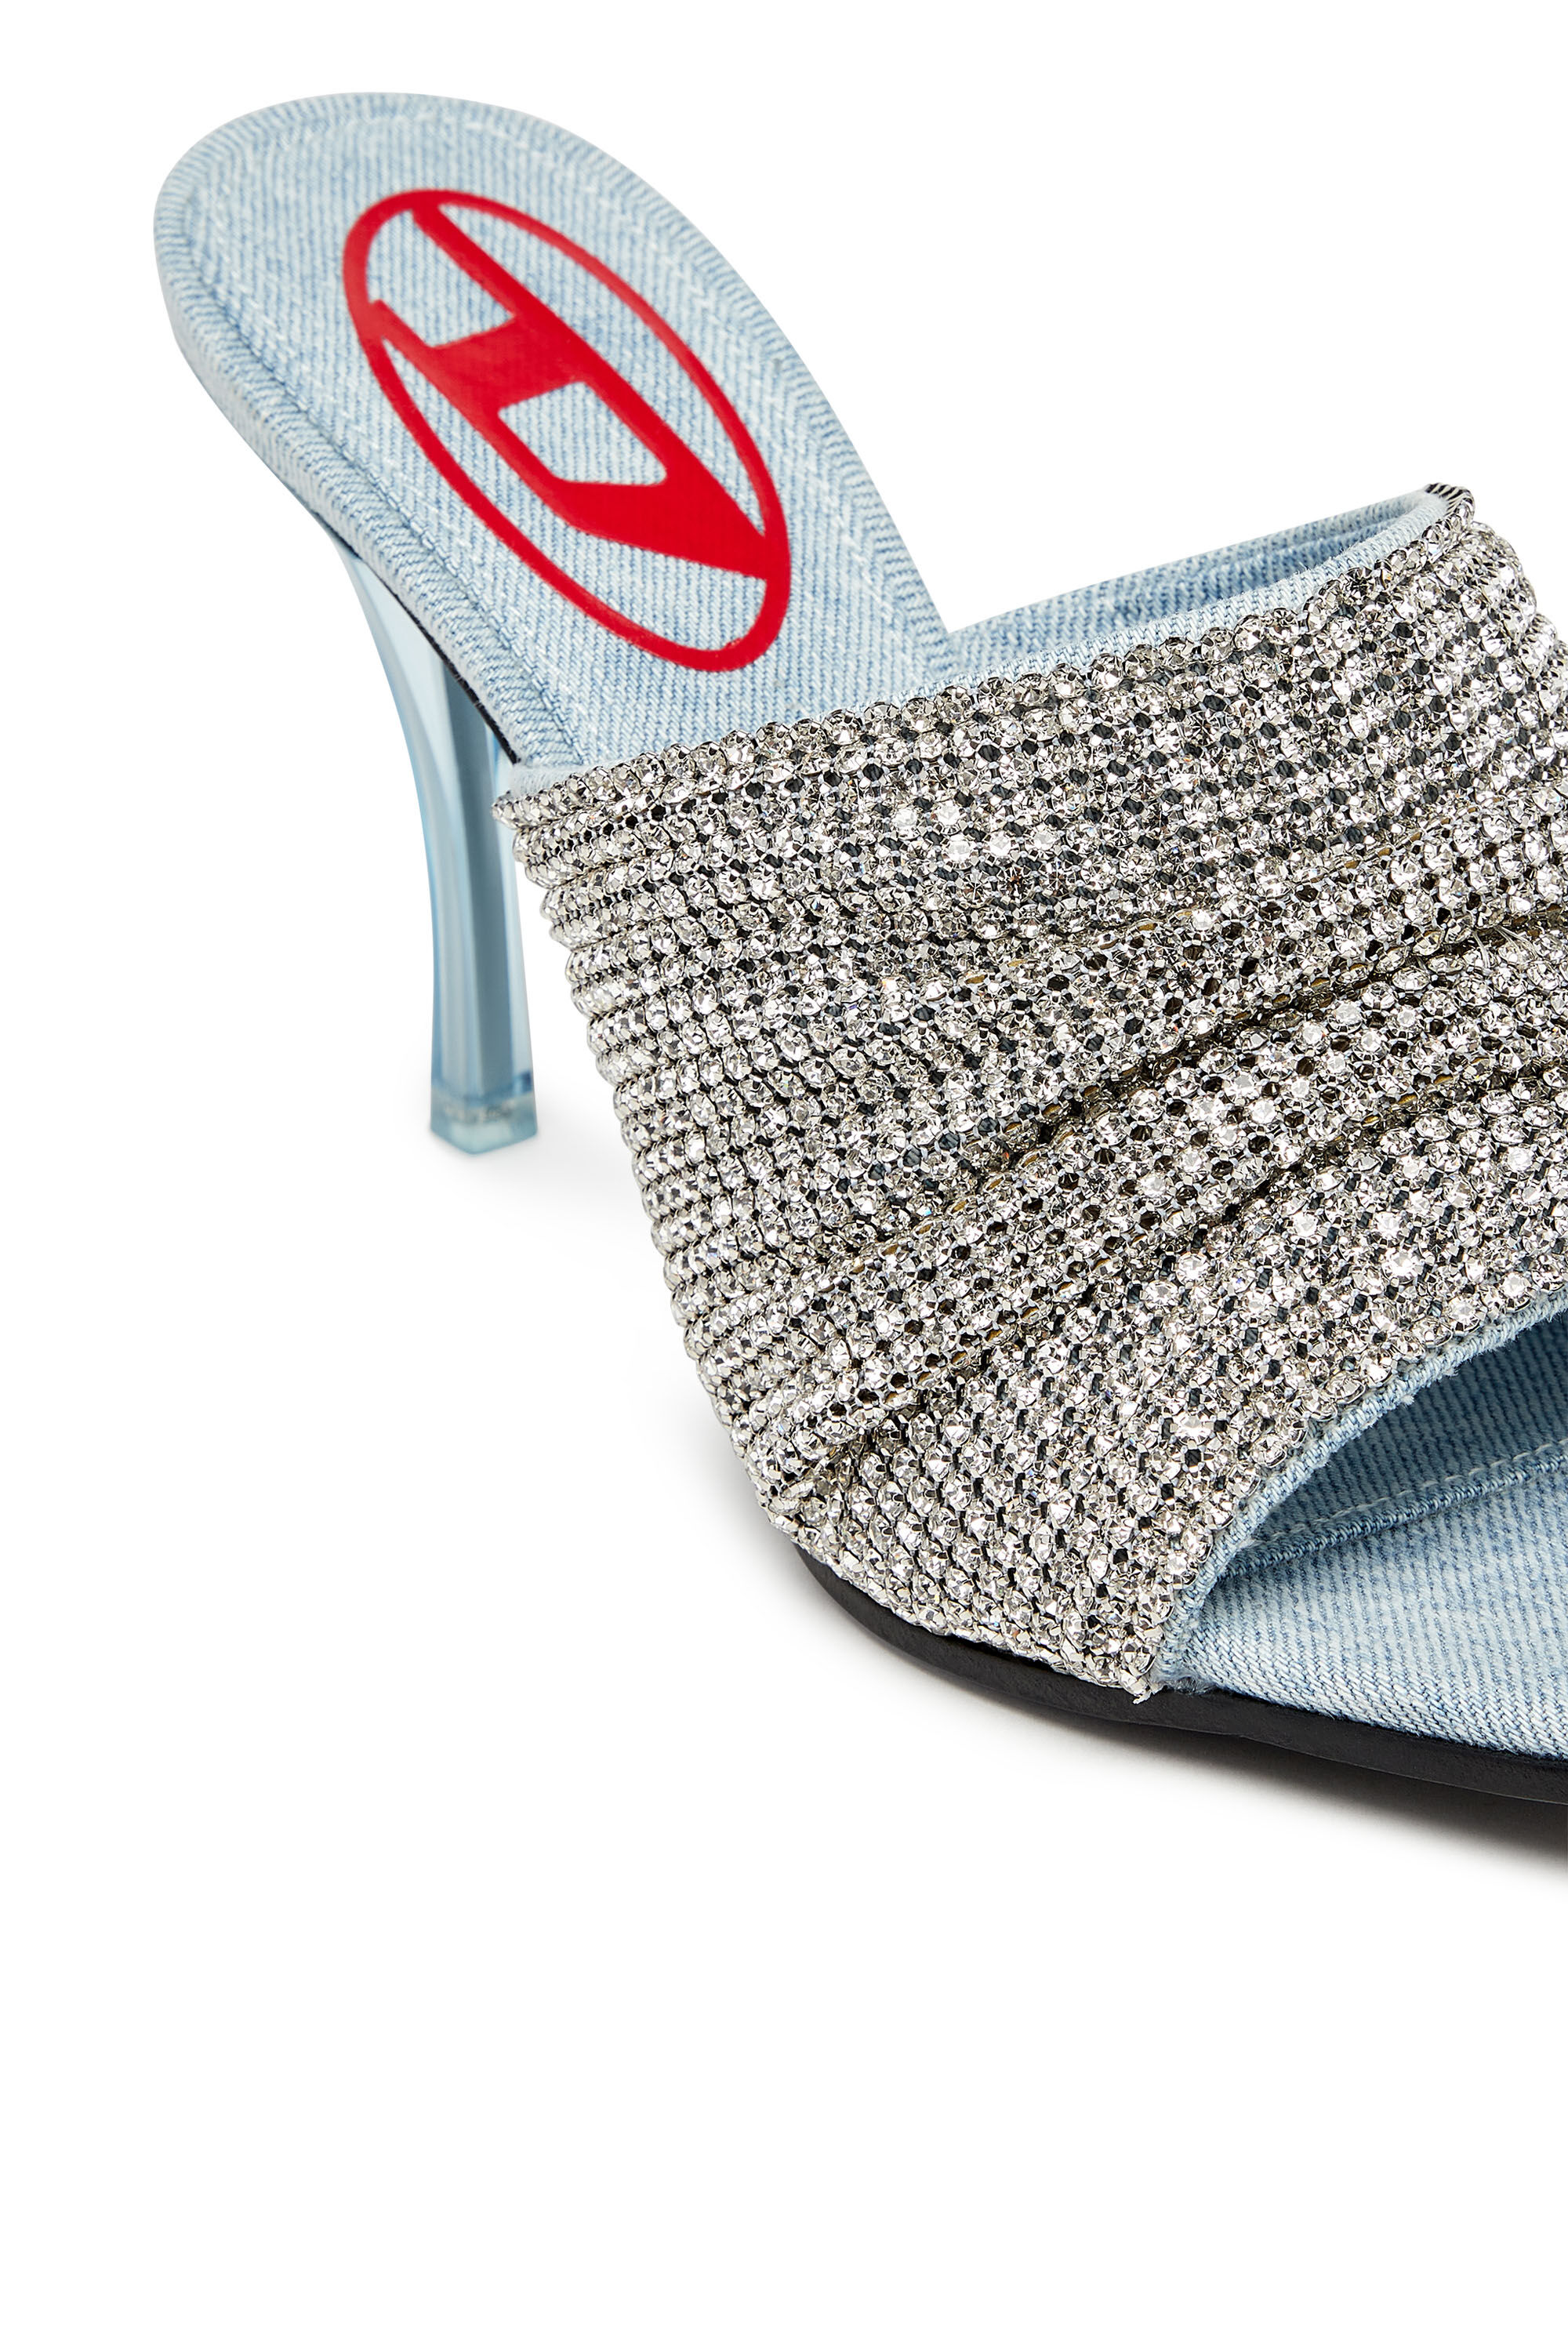 Diesel - D-SYDNEY SDL S, Female D-Sydney Sdl S Sandals - Mule sandals with rhinestone band in Silver - Image 4